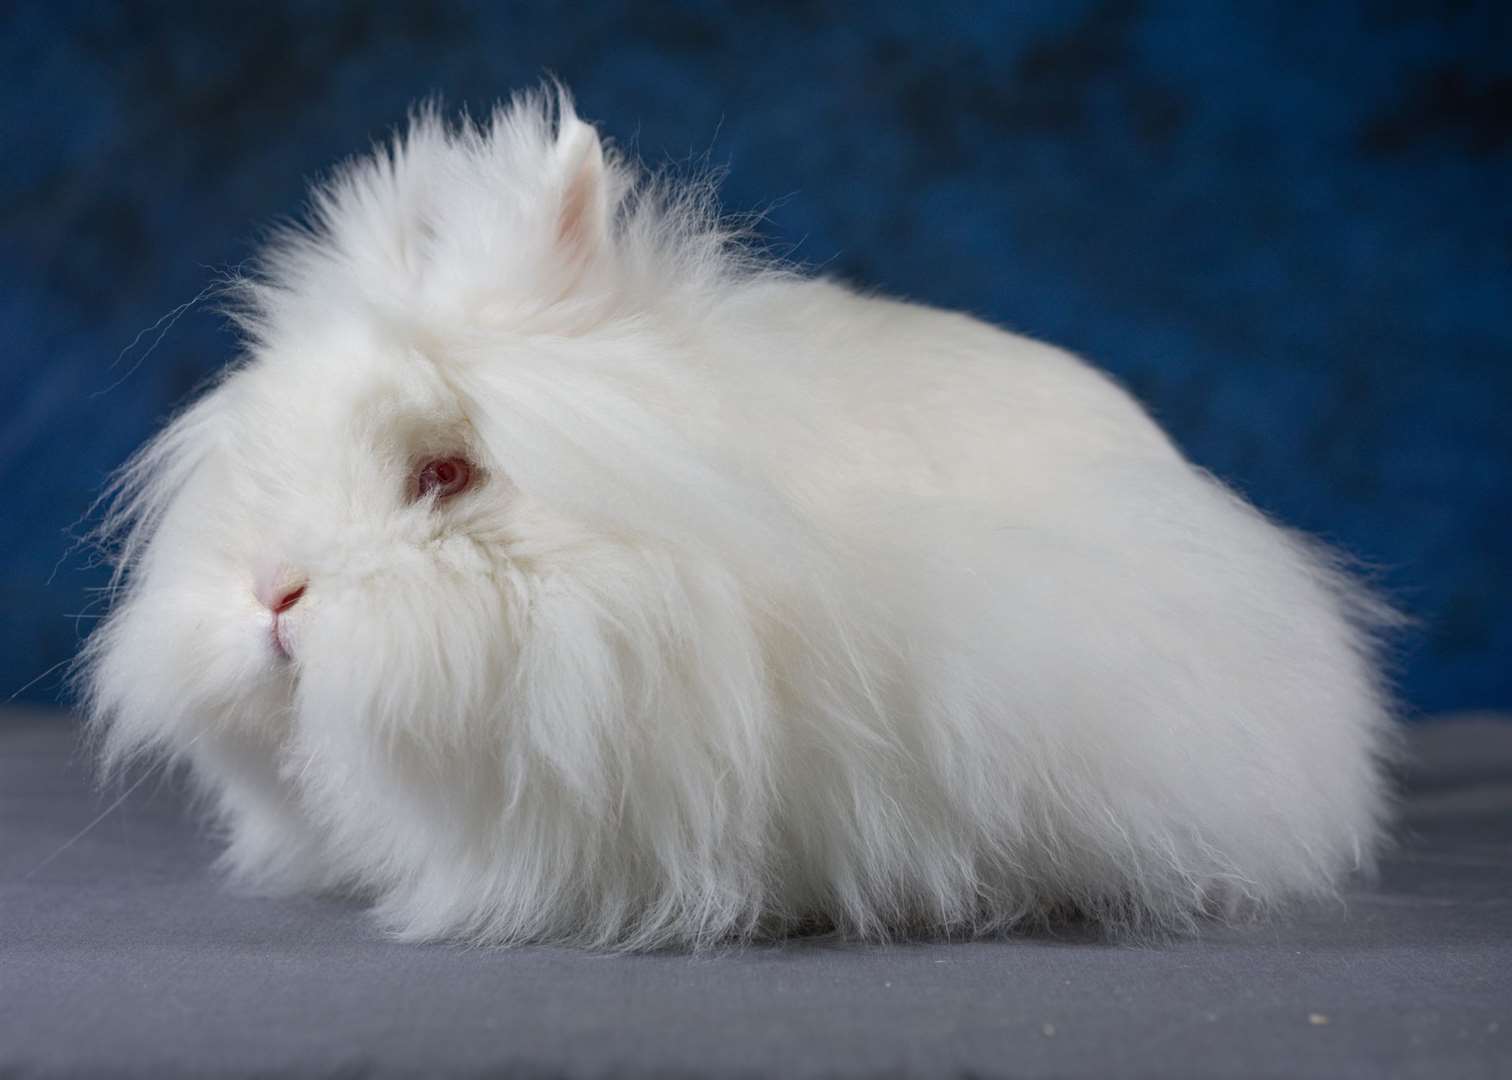 Cirrus, a lionhead owned by Maureen Thomson, which won best of breed lionhead and second in ladies' fancy. Picture: Simon Beynon